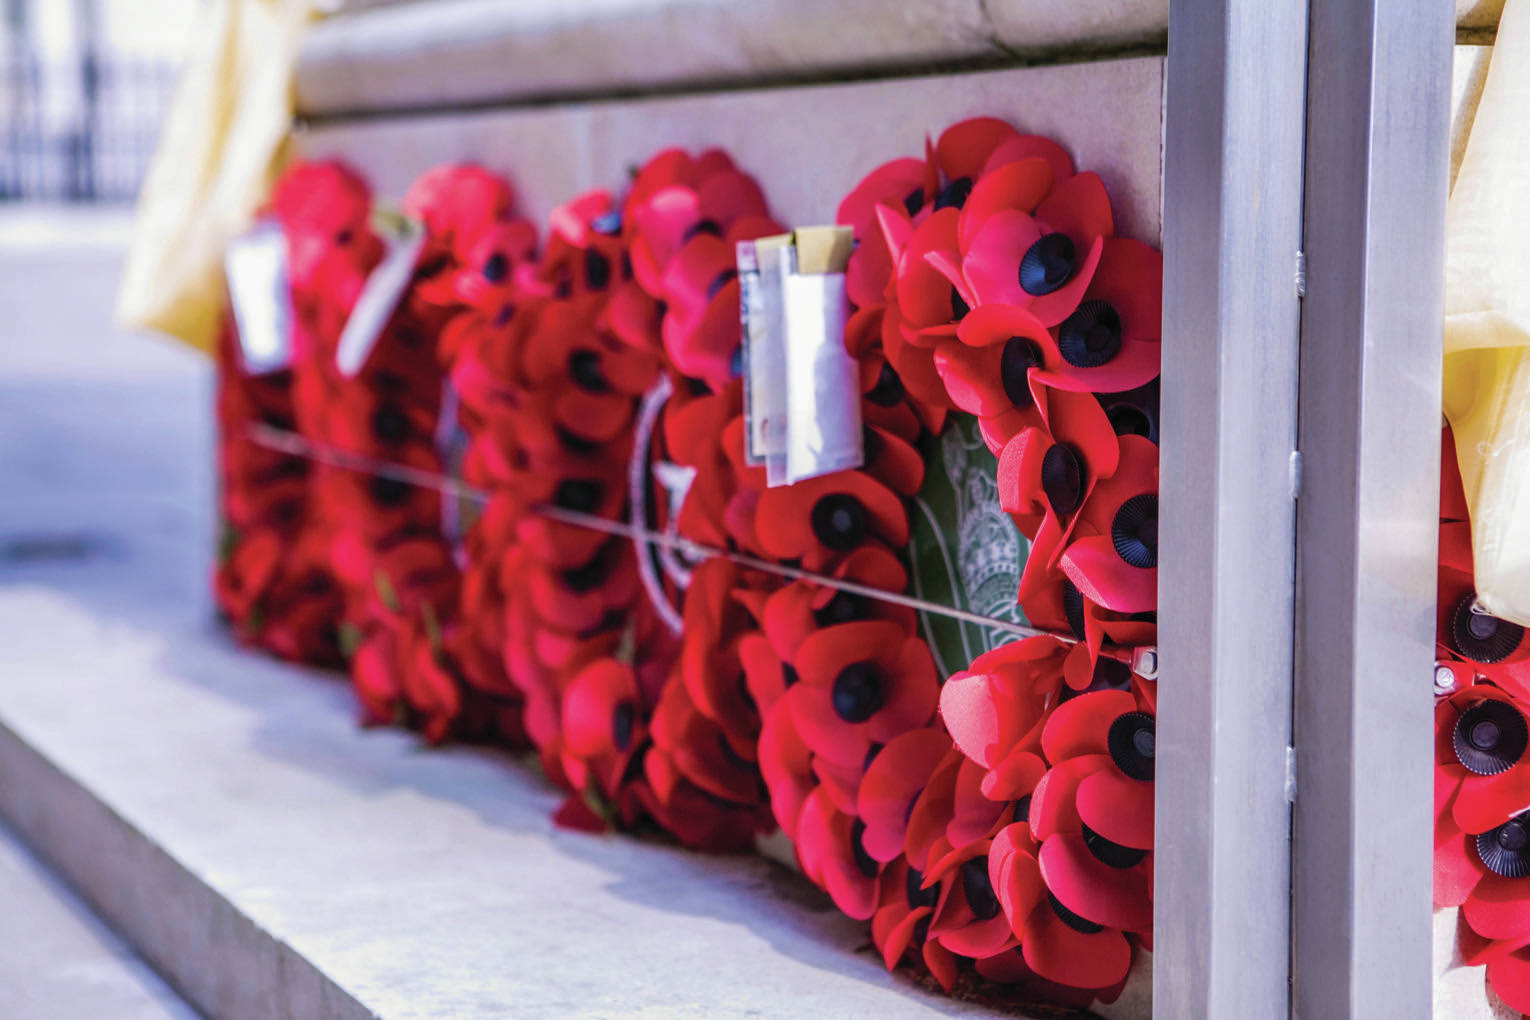 Honouring the men and women who served our country